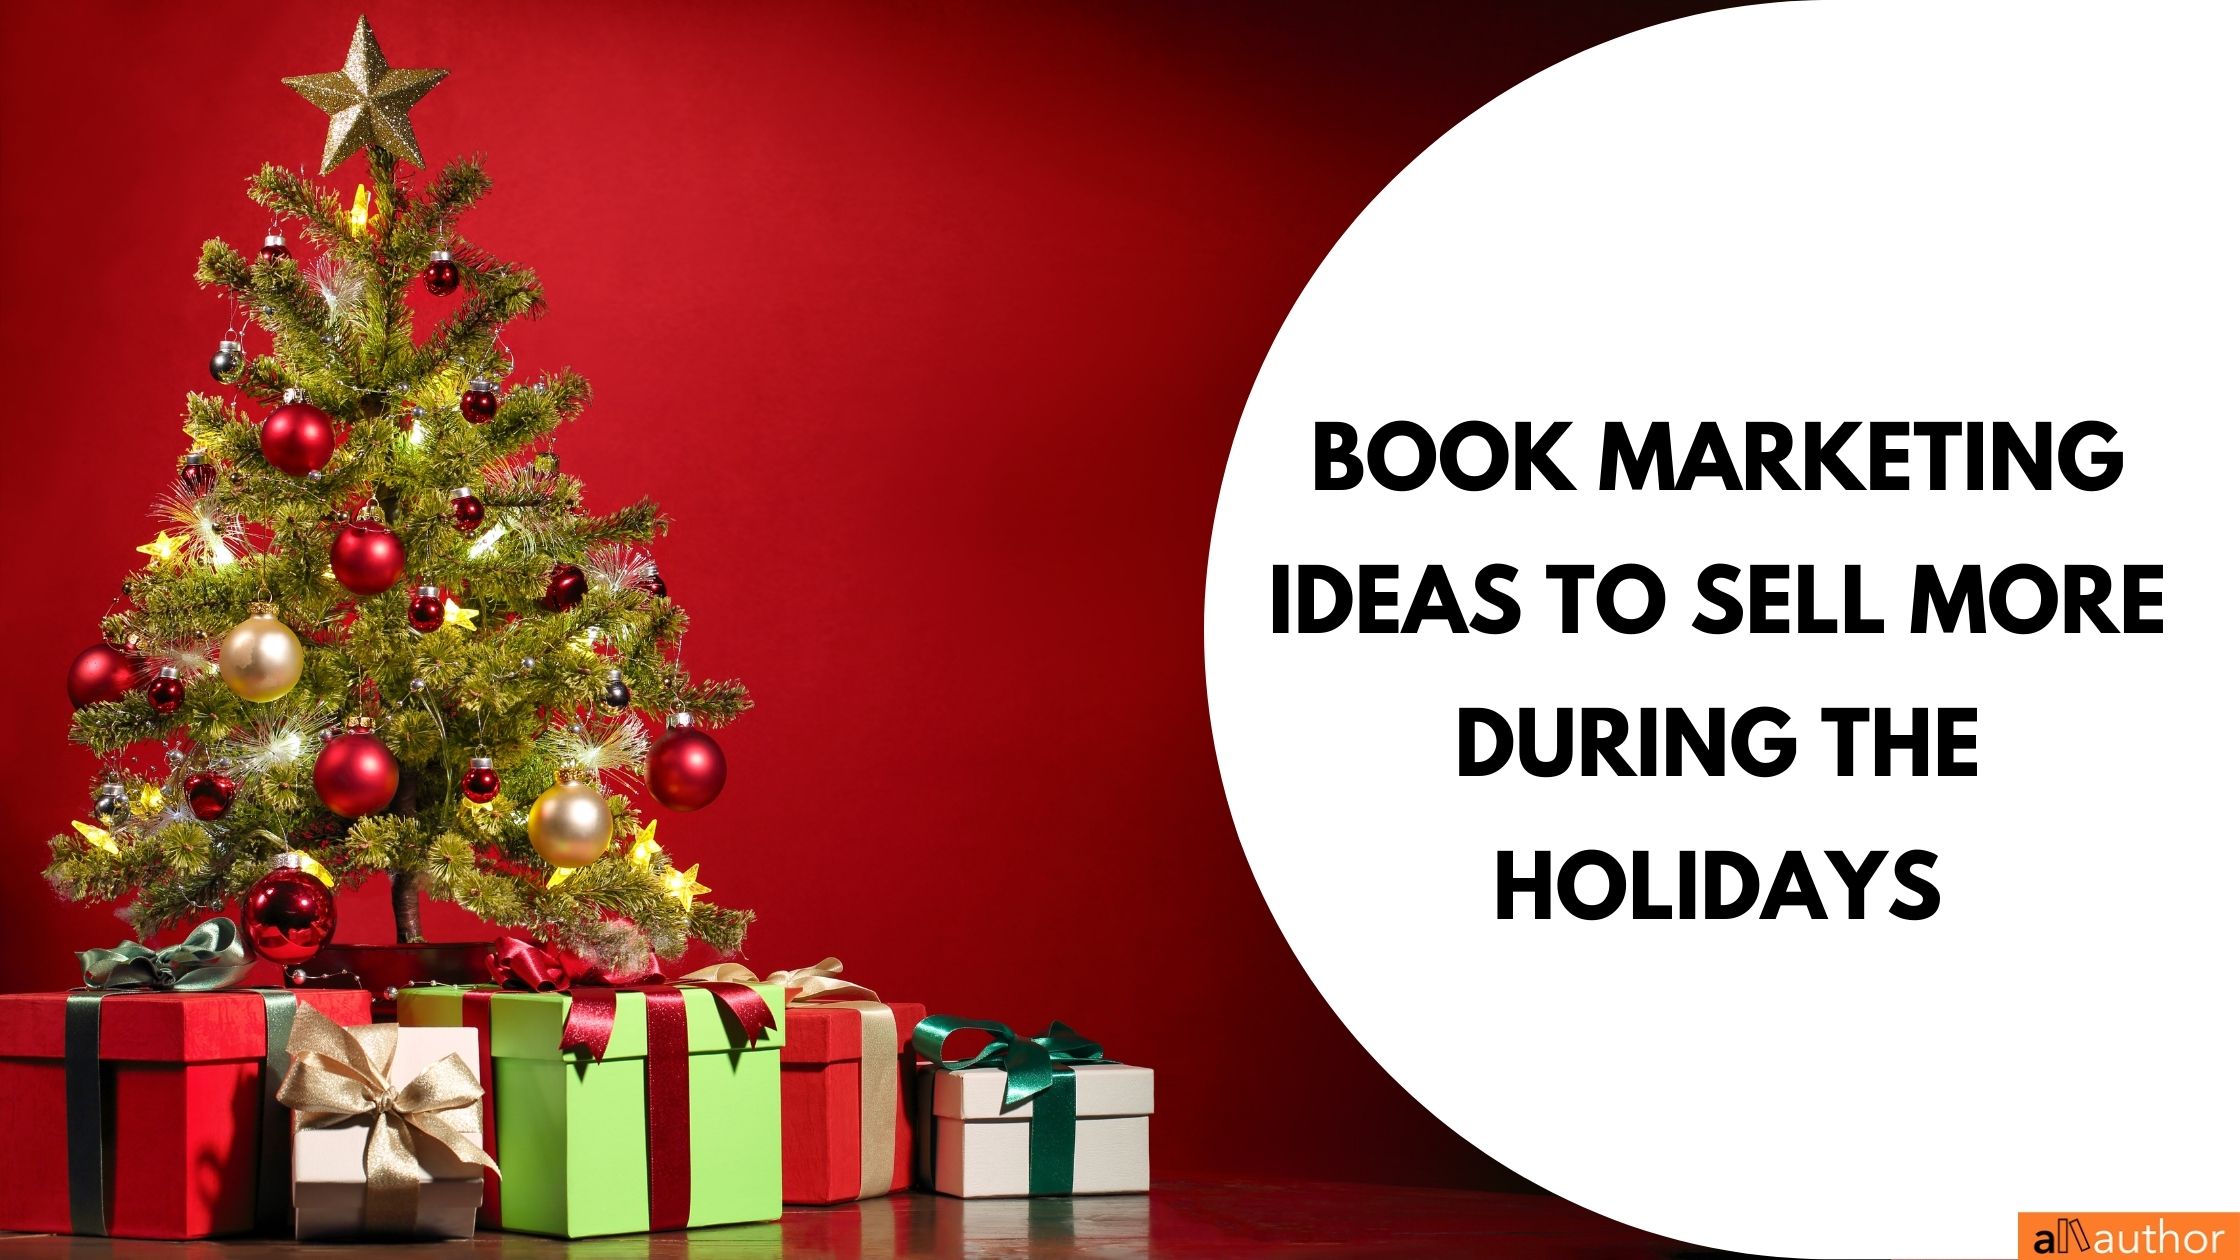 8 Book Marketing Ideas to Sell More Books During the Holidays